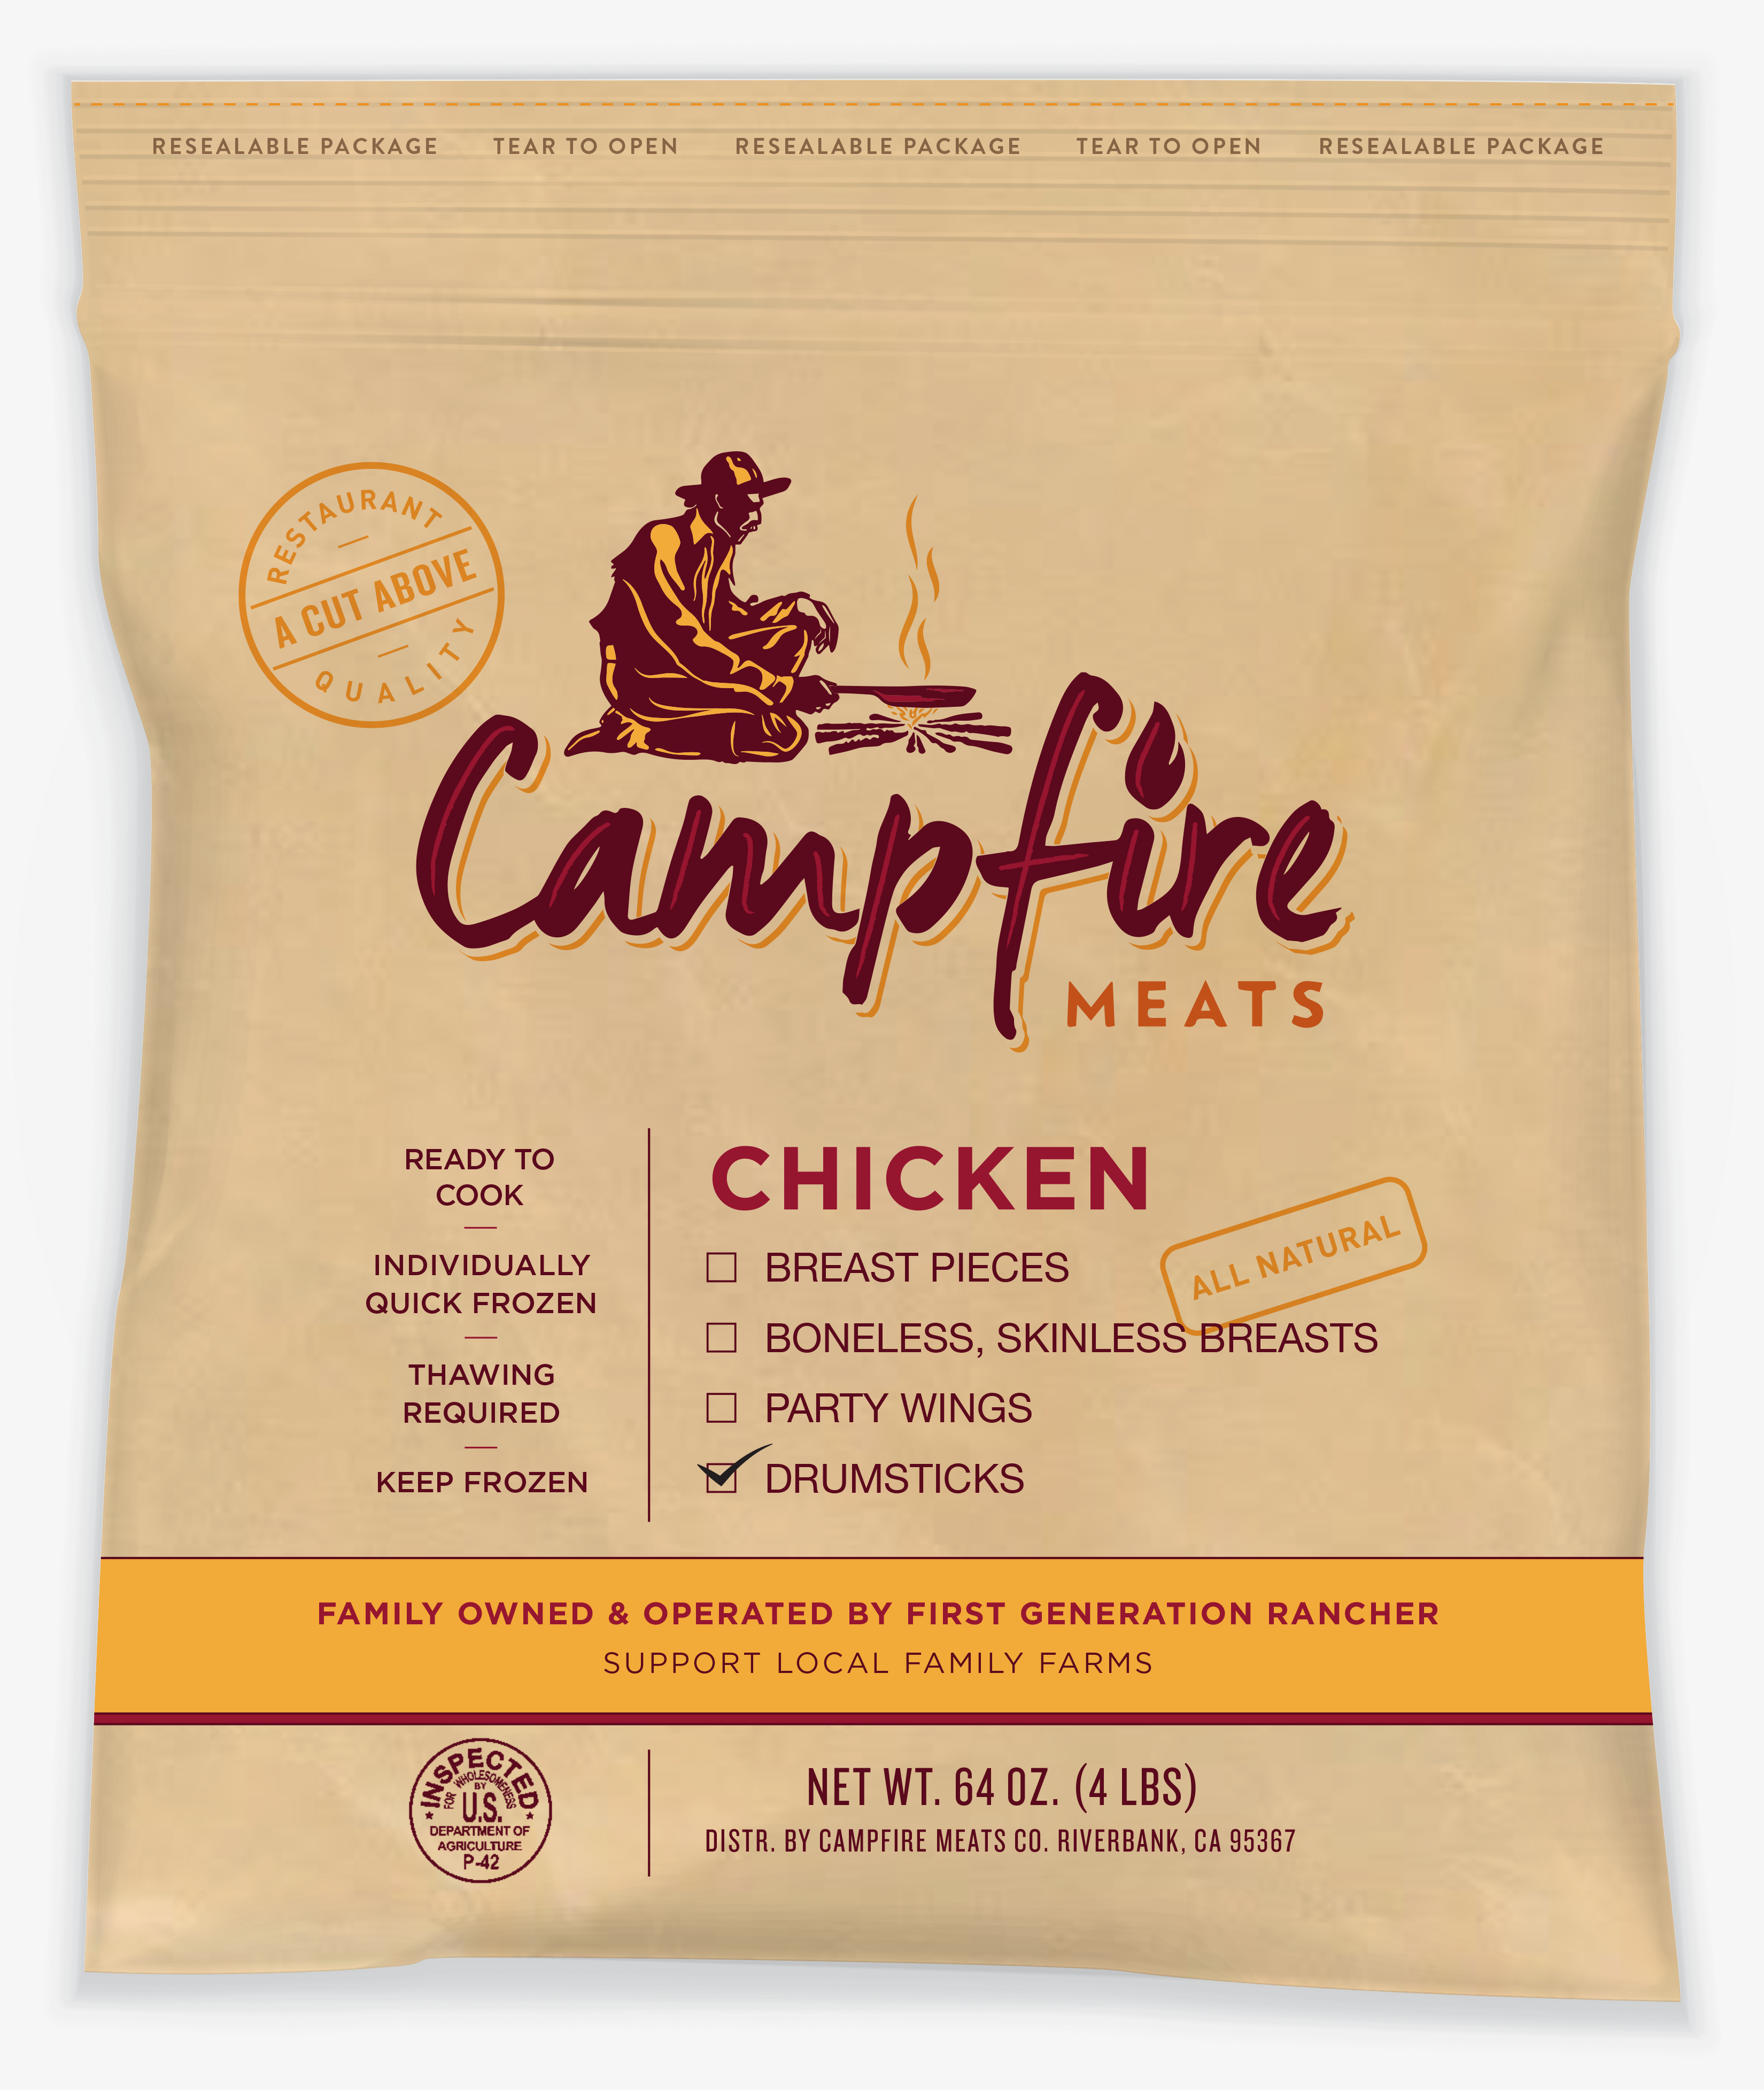 A bag of campfire meats chicken.